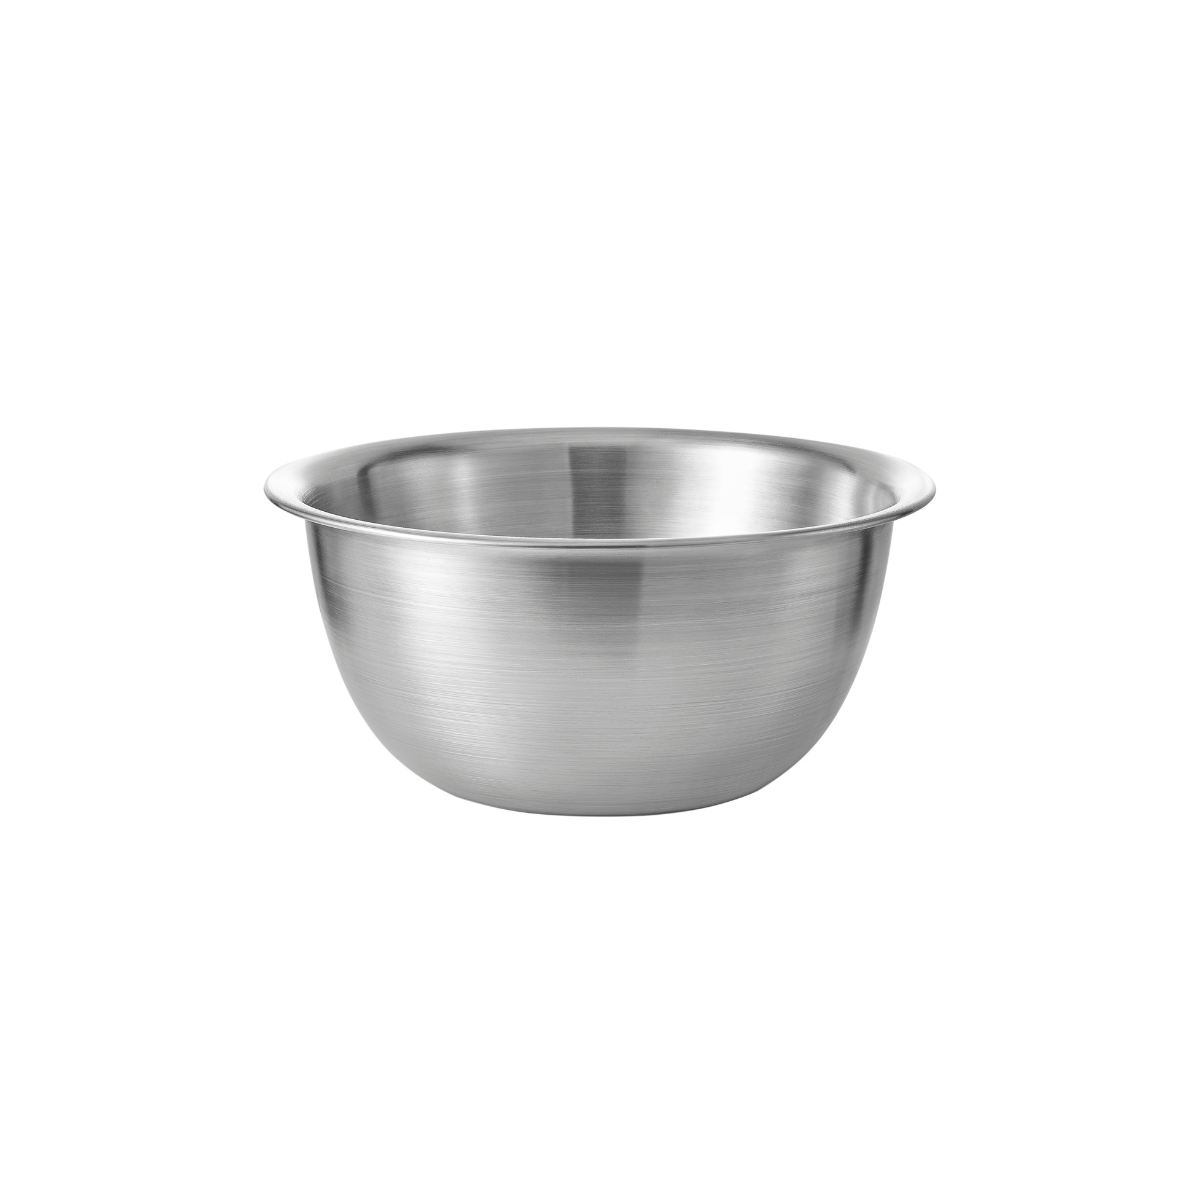 MIXING BOWL STAINLESS STEEL 18/10 (20cm)